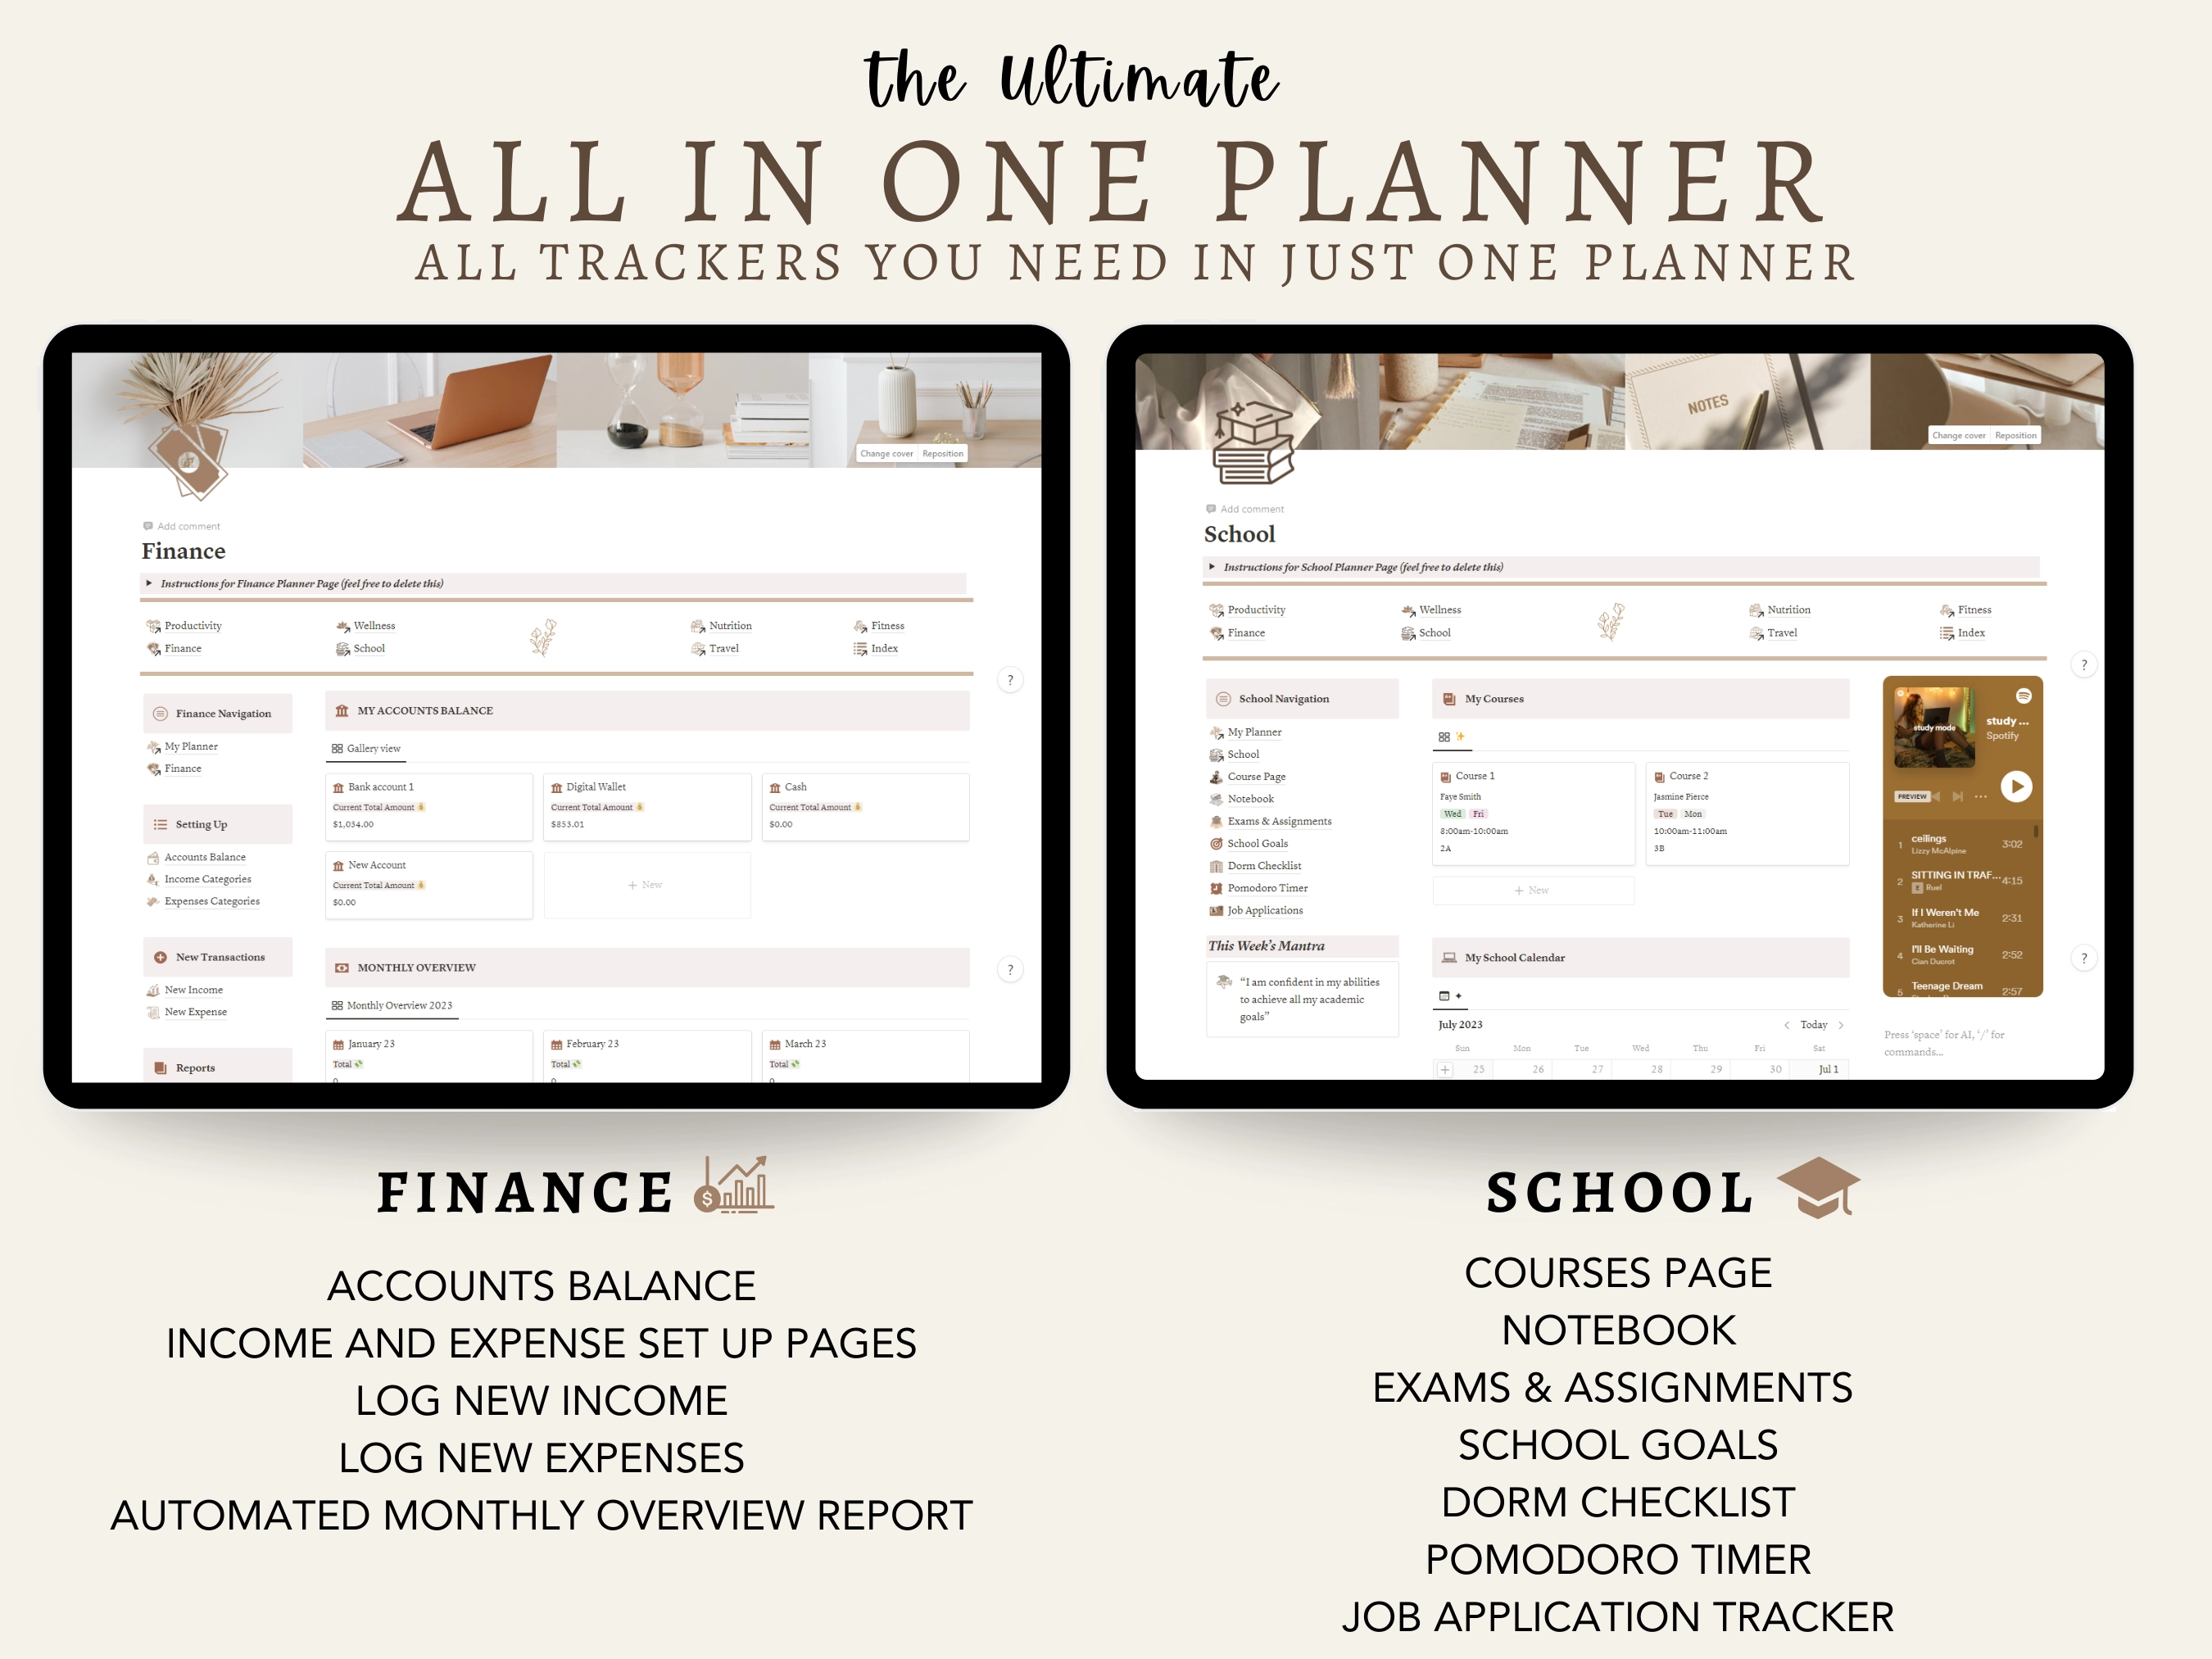 All In One Life Planner